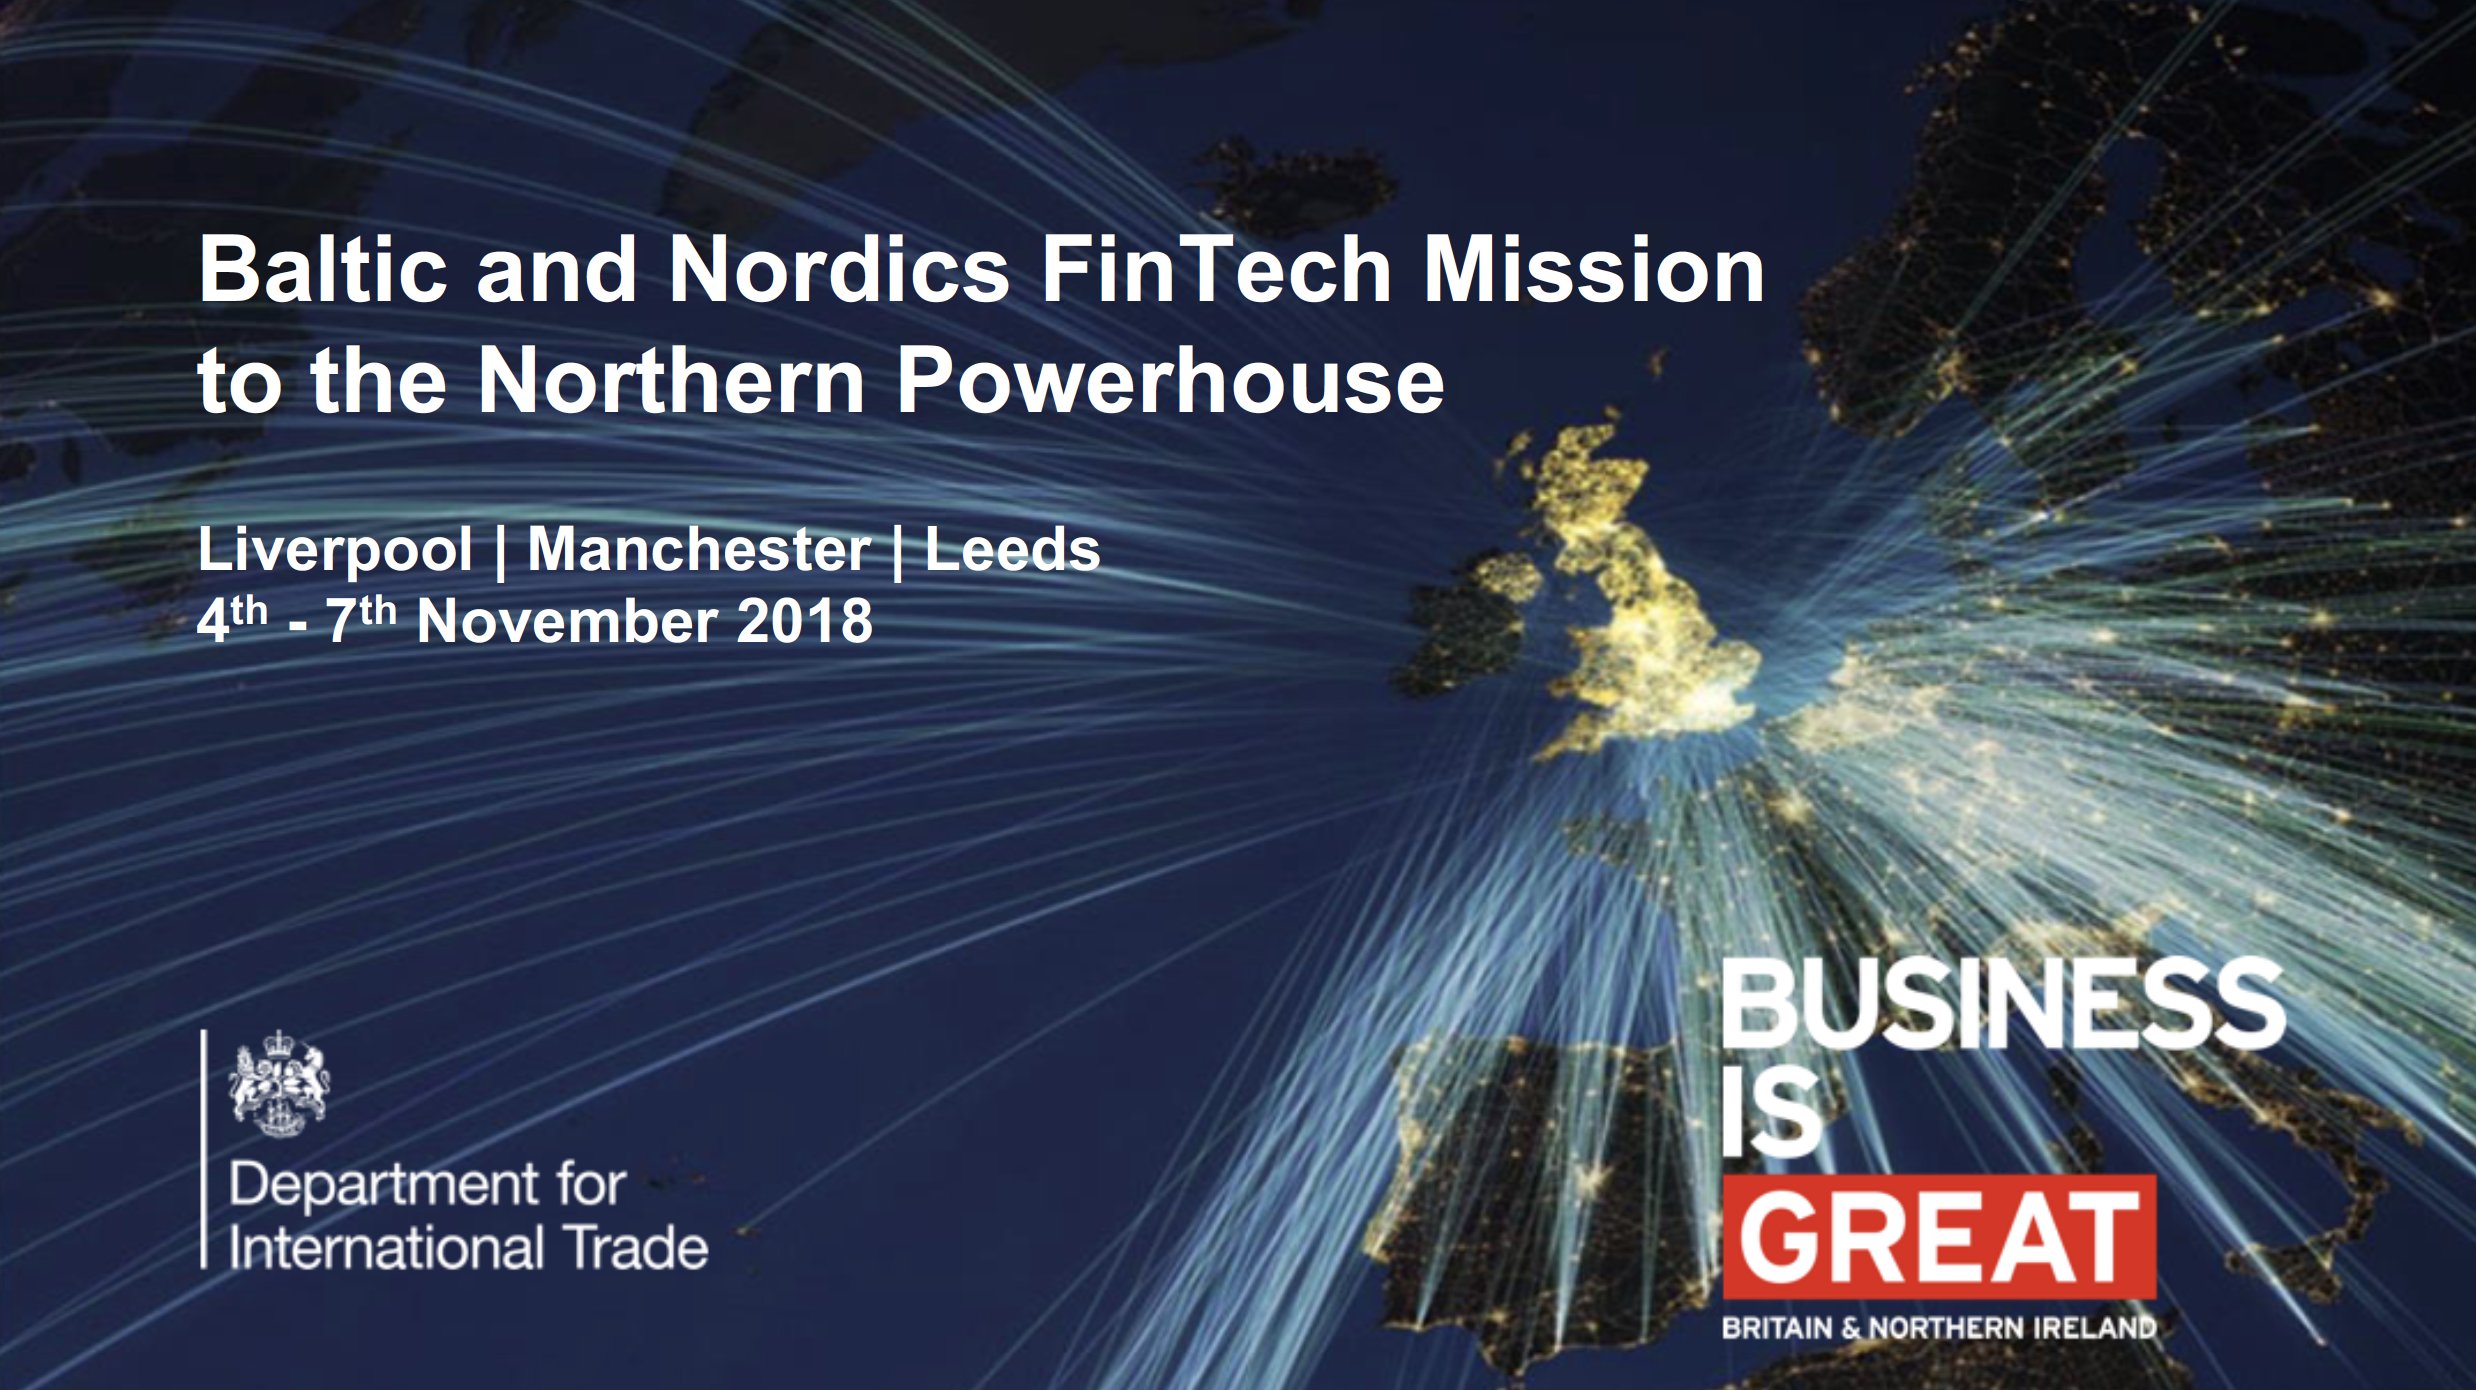 FinTech North to host trilogy of events for Nordic and Baltic FinTech delegation in November